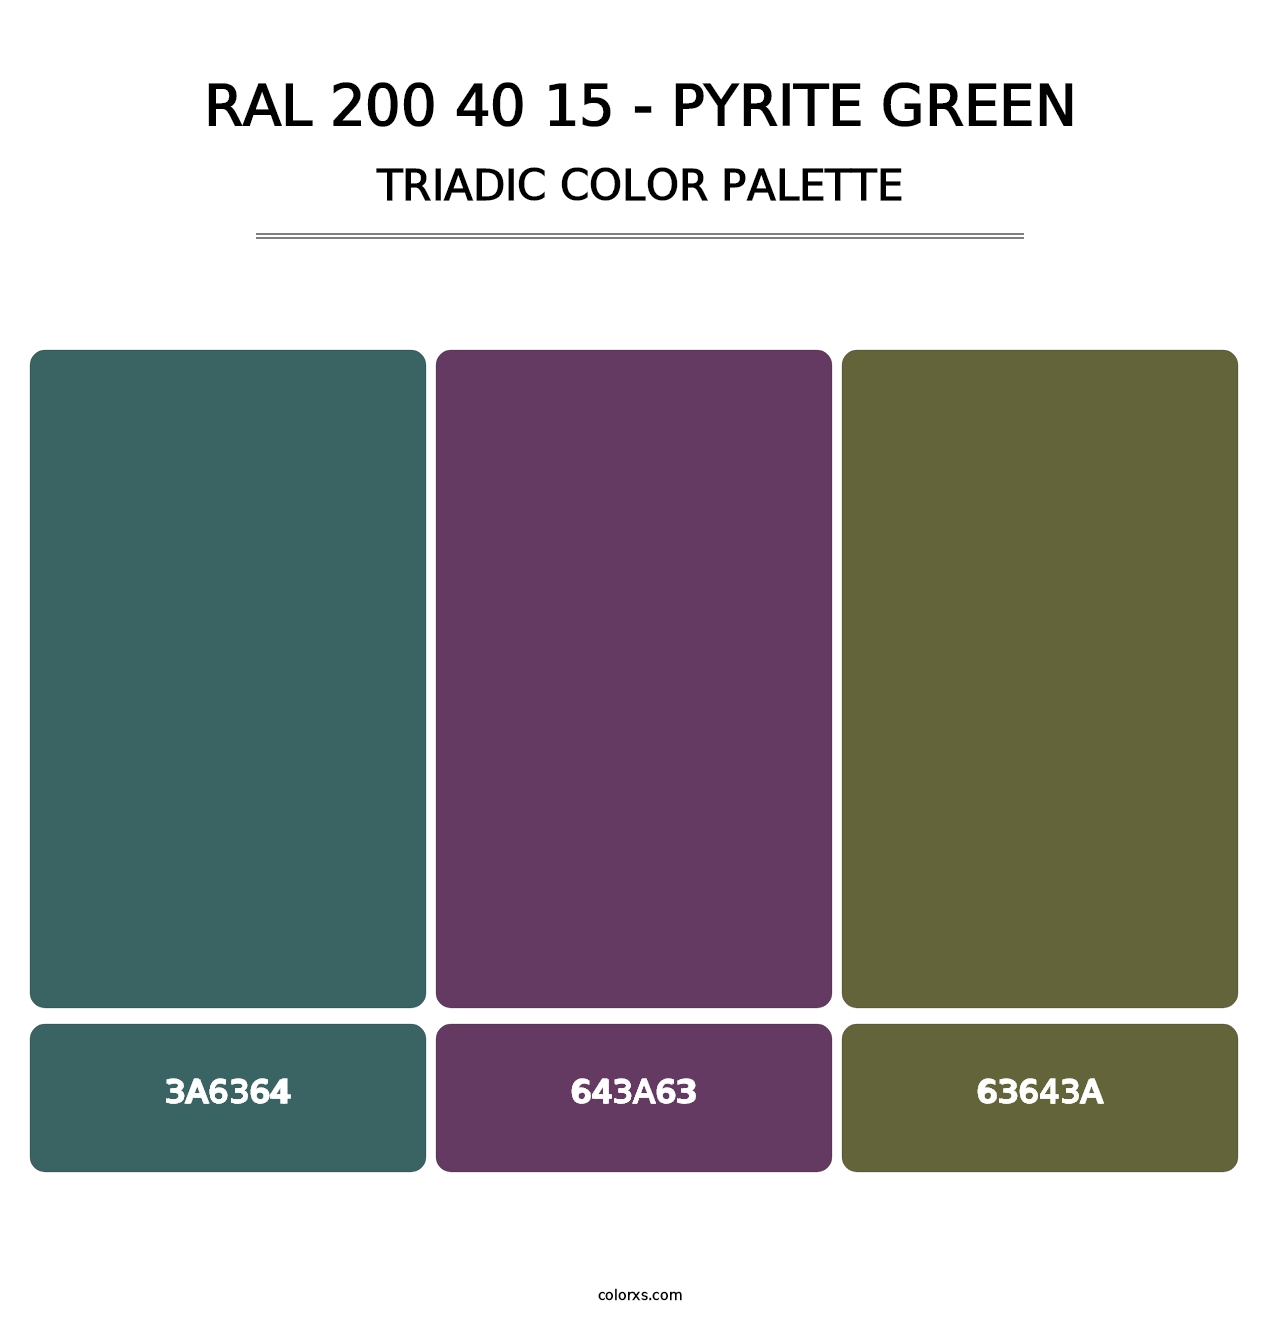 RAL 200 40 15 - Pyrite Green - Triadic Color Palette